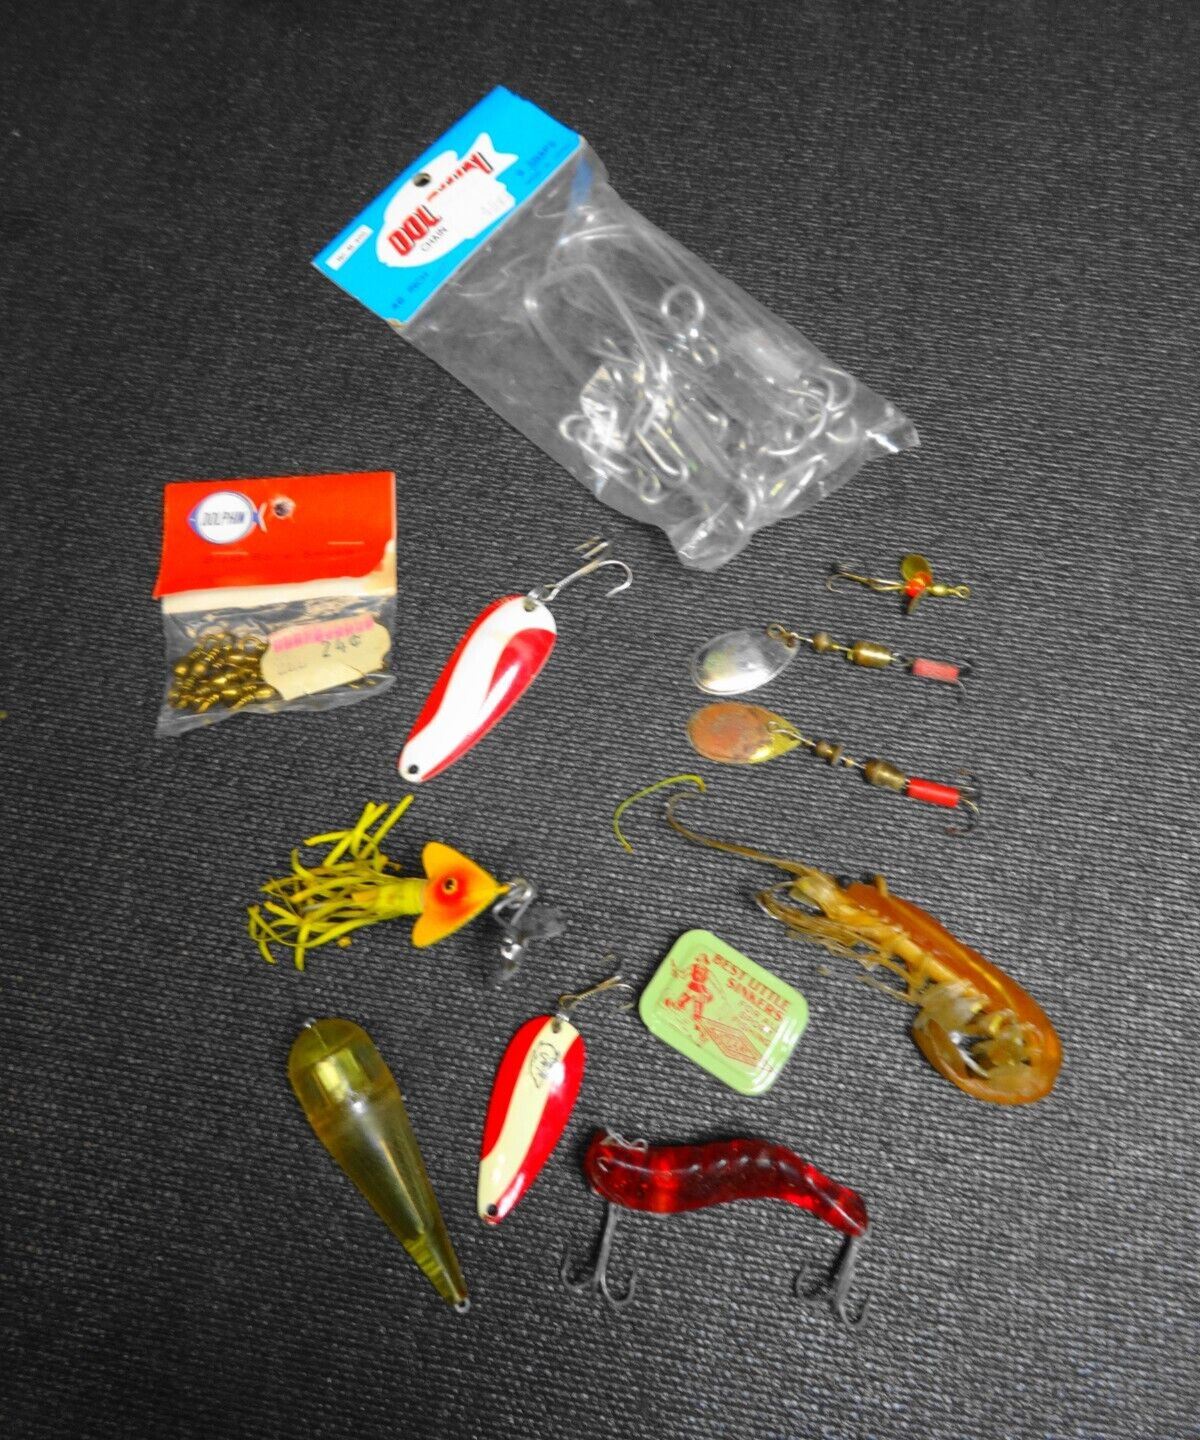 OLD Vintage FISHING TACKLE BOX LOT HOOKS LURES CRAWFISH SPOONS SPINNERS NOS